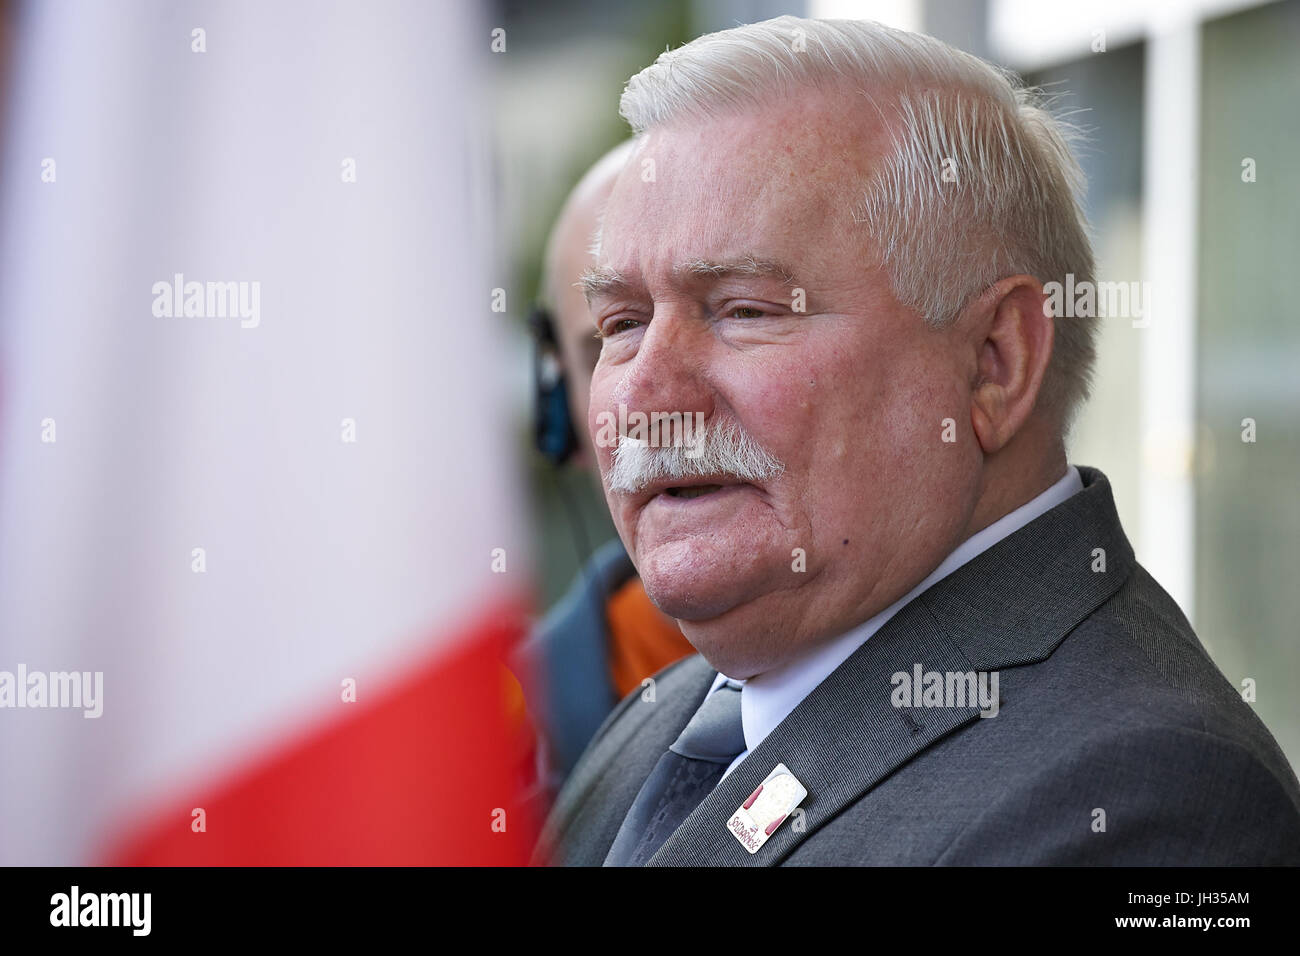 Former President of Poland Lech Walesa in 2015. Stock Photo